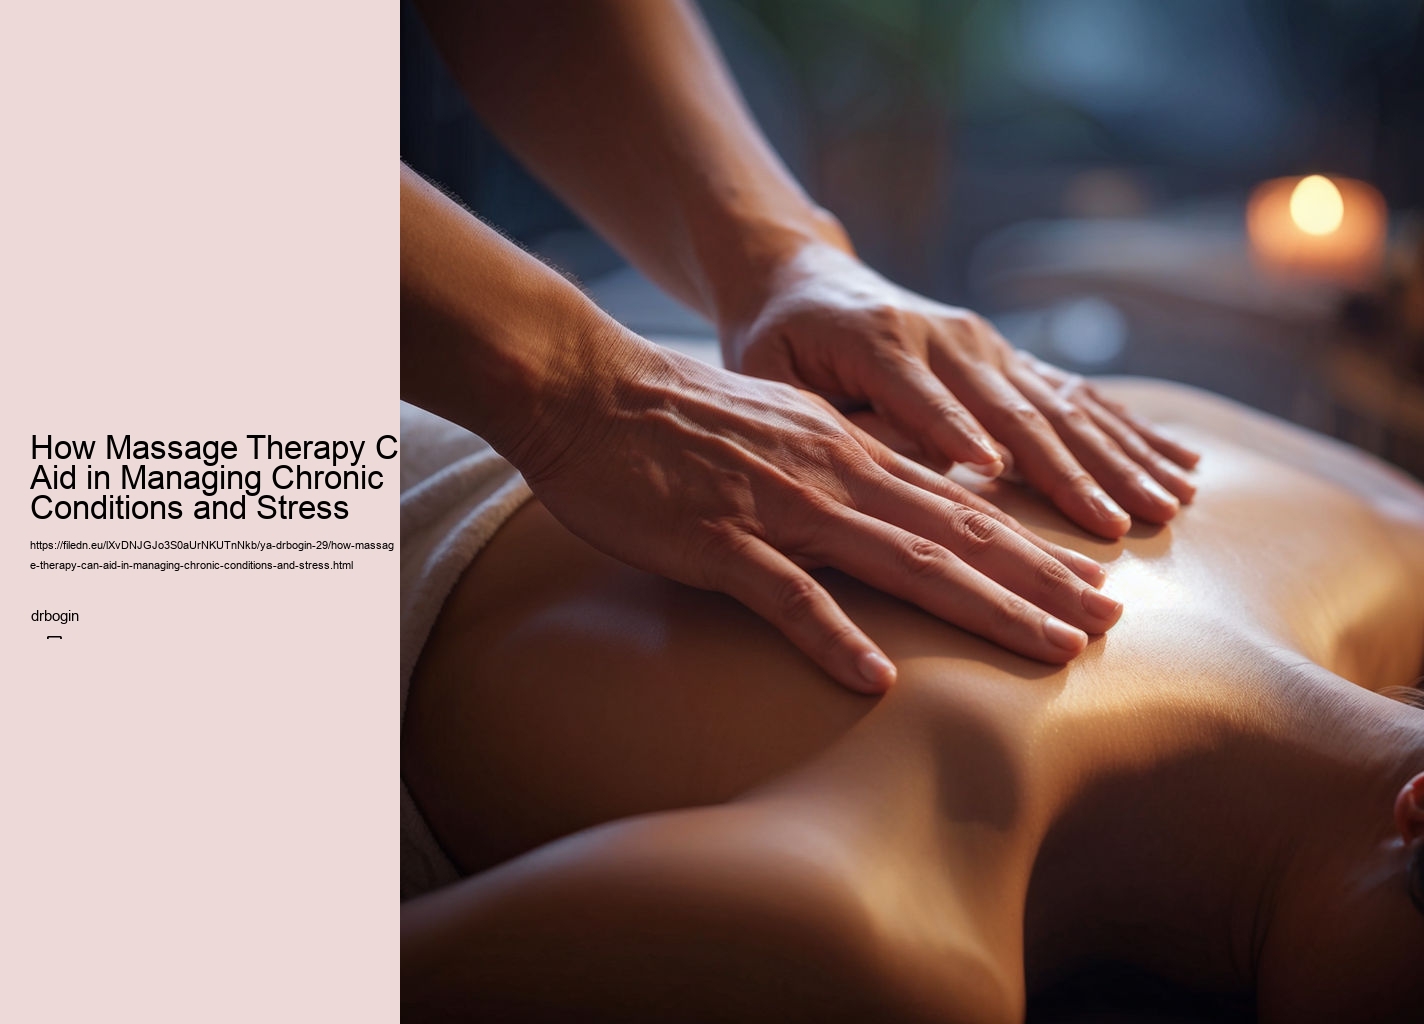 How Massage Therapy Can Aid in Managing Chronic Conditions and Stress